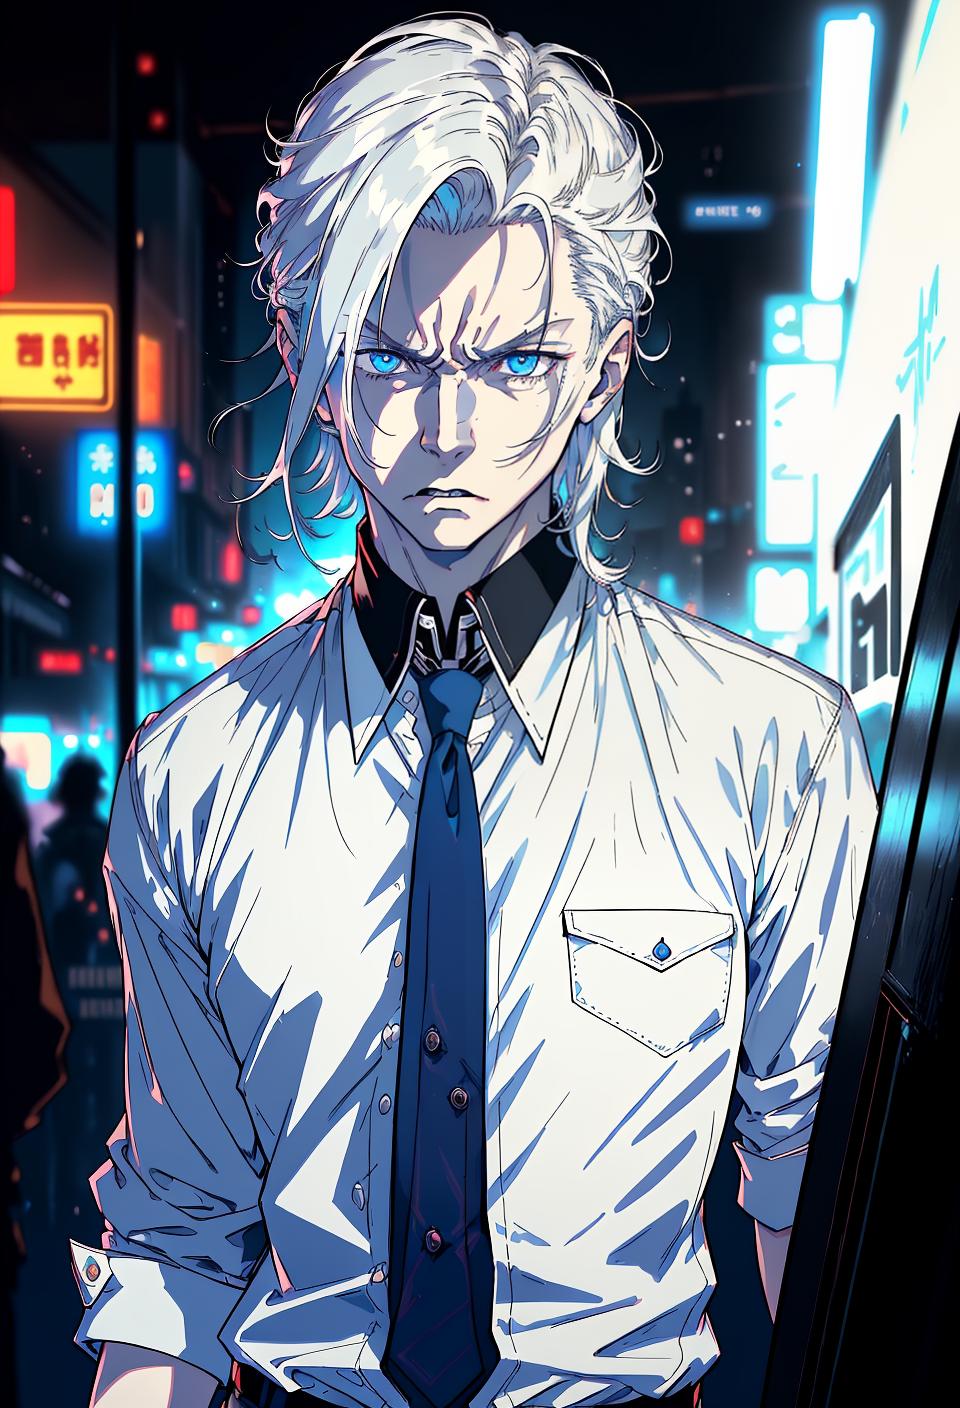  ((trending, highres, masterpiece, cinematic shot)), 1boy, mature, male date attire, techno scene, medium-length straight white hair, side locks hairstyle, large blue eyes, sweet personality, angry expression, very pale skin, chaotic, observant